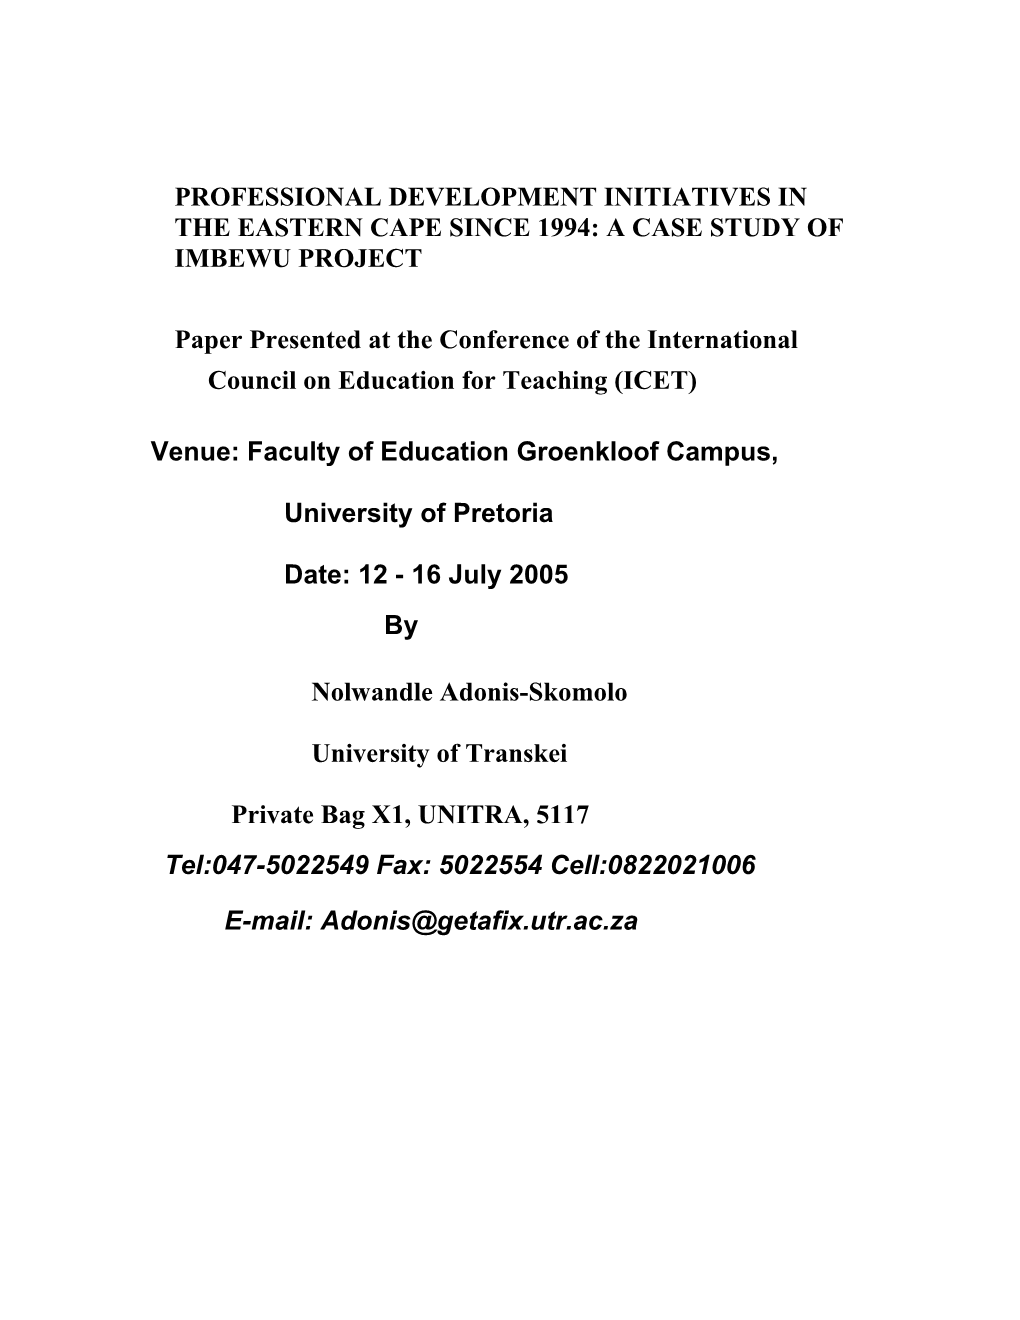 Planning for Professional Development of Teachers and Schools in the Eastern Cape Province